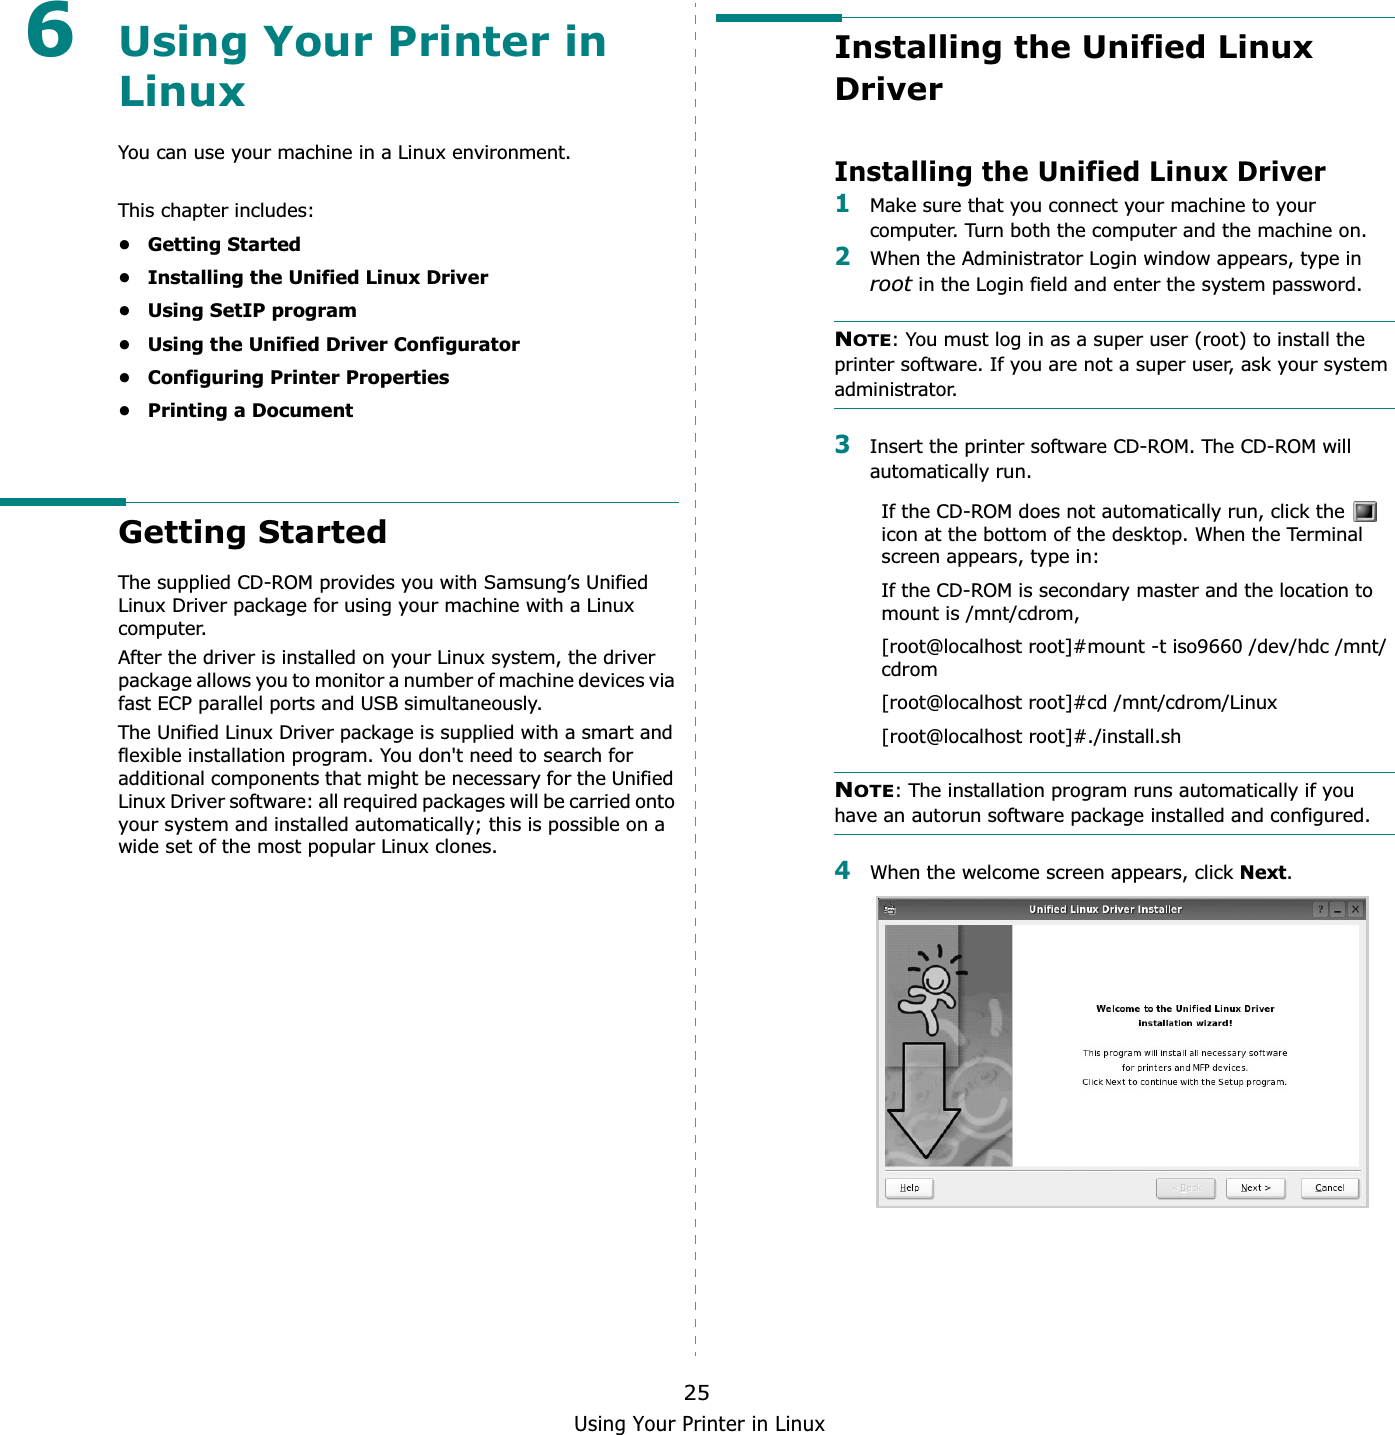 Using Your Printer in Linux256Using Your Printer in LinuxYou can use your machine in a Linux environment. This chapter includes:• Getting Started• Installing the Unified Linux Driver• Using SetIP program• Using the Unified Driver Configurator• Configuring Printer Properties• Printing a DocumentGetting StartedThe supplied CD-ROM provides you with Samsung’s Unified Linux Driver package for using your machine with a Linux computer.After the driver is installed on your Linux system, the driver package allows you to monitor a number of machine devices via fast ECP parallel ports and USB simultaneously. The Unified Linux Driver package is supplied with a smart and flexible installation program. You don&apos;t need to search for additional components that might be necessary for the Unified Linux Driver software: all required packages will be carried onto your system and installed automatically; this is possible on a wide set of the most popular Linux clones.Installing the Unified Linux DriverInstalling the Unified Linux Driver1Make sure that you connect your machine to your computer. Turn both the computer and the machine on.2When the Administrator Login window appears, type in root in the Login field and enter the system password.NOTE: You must log in as a super user (root) to install the printer software. If you are not a super user, ask your system administrator.3Insert the printer software CD-ROM. The CD-ROM will automatically run.If the CD-ROM does not automatically run, click the   icon at the bottom of the desktop. When the Terminal screen appears, type in:If the CD-ROM is secondary master and the location to mount is /mnt/cdrom,[root@localhost root]#mount -t iso9660 /dev/hdc /mnt/cdrom[root@localhost root]#cd /mnt/cdrom/Linux[root@localhost root]#./install.sh NOTE: The installation program runs automatically if you have an autorun software package installed and configured.4When the welcome screen appears, click Next.